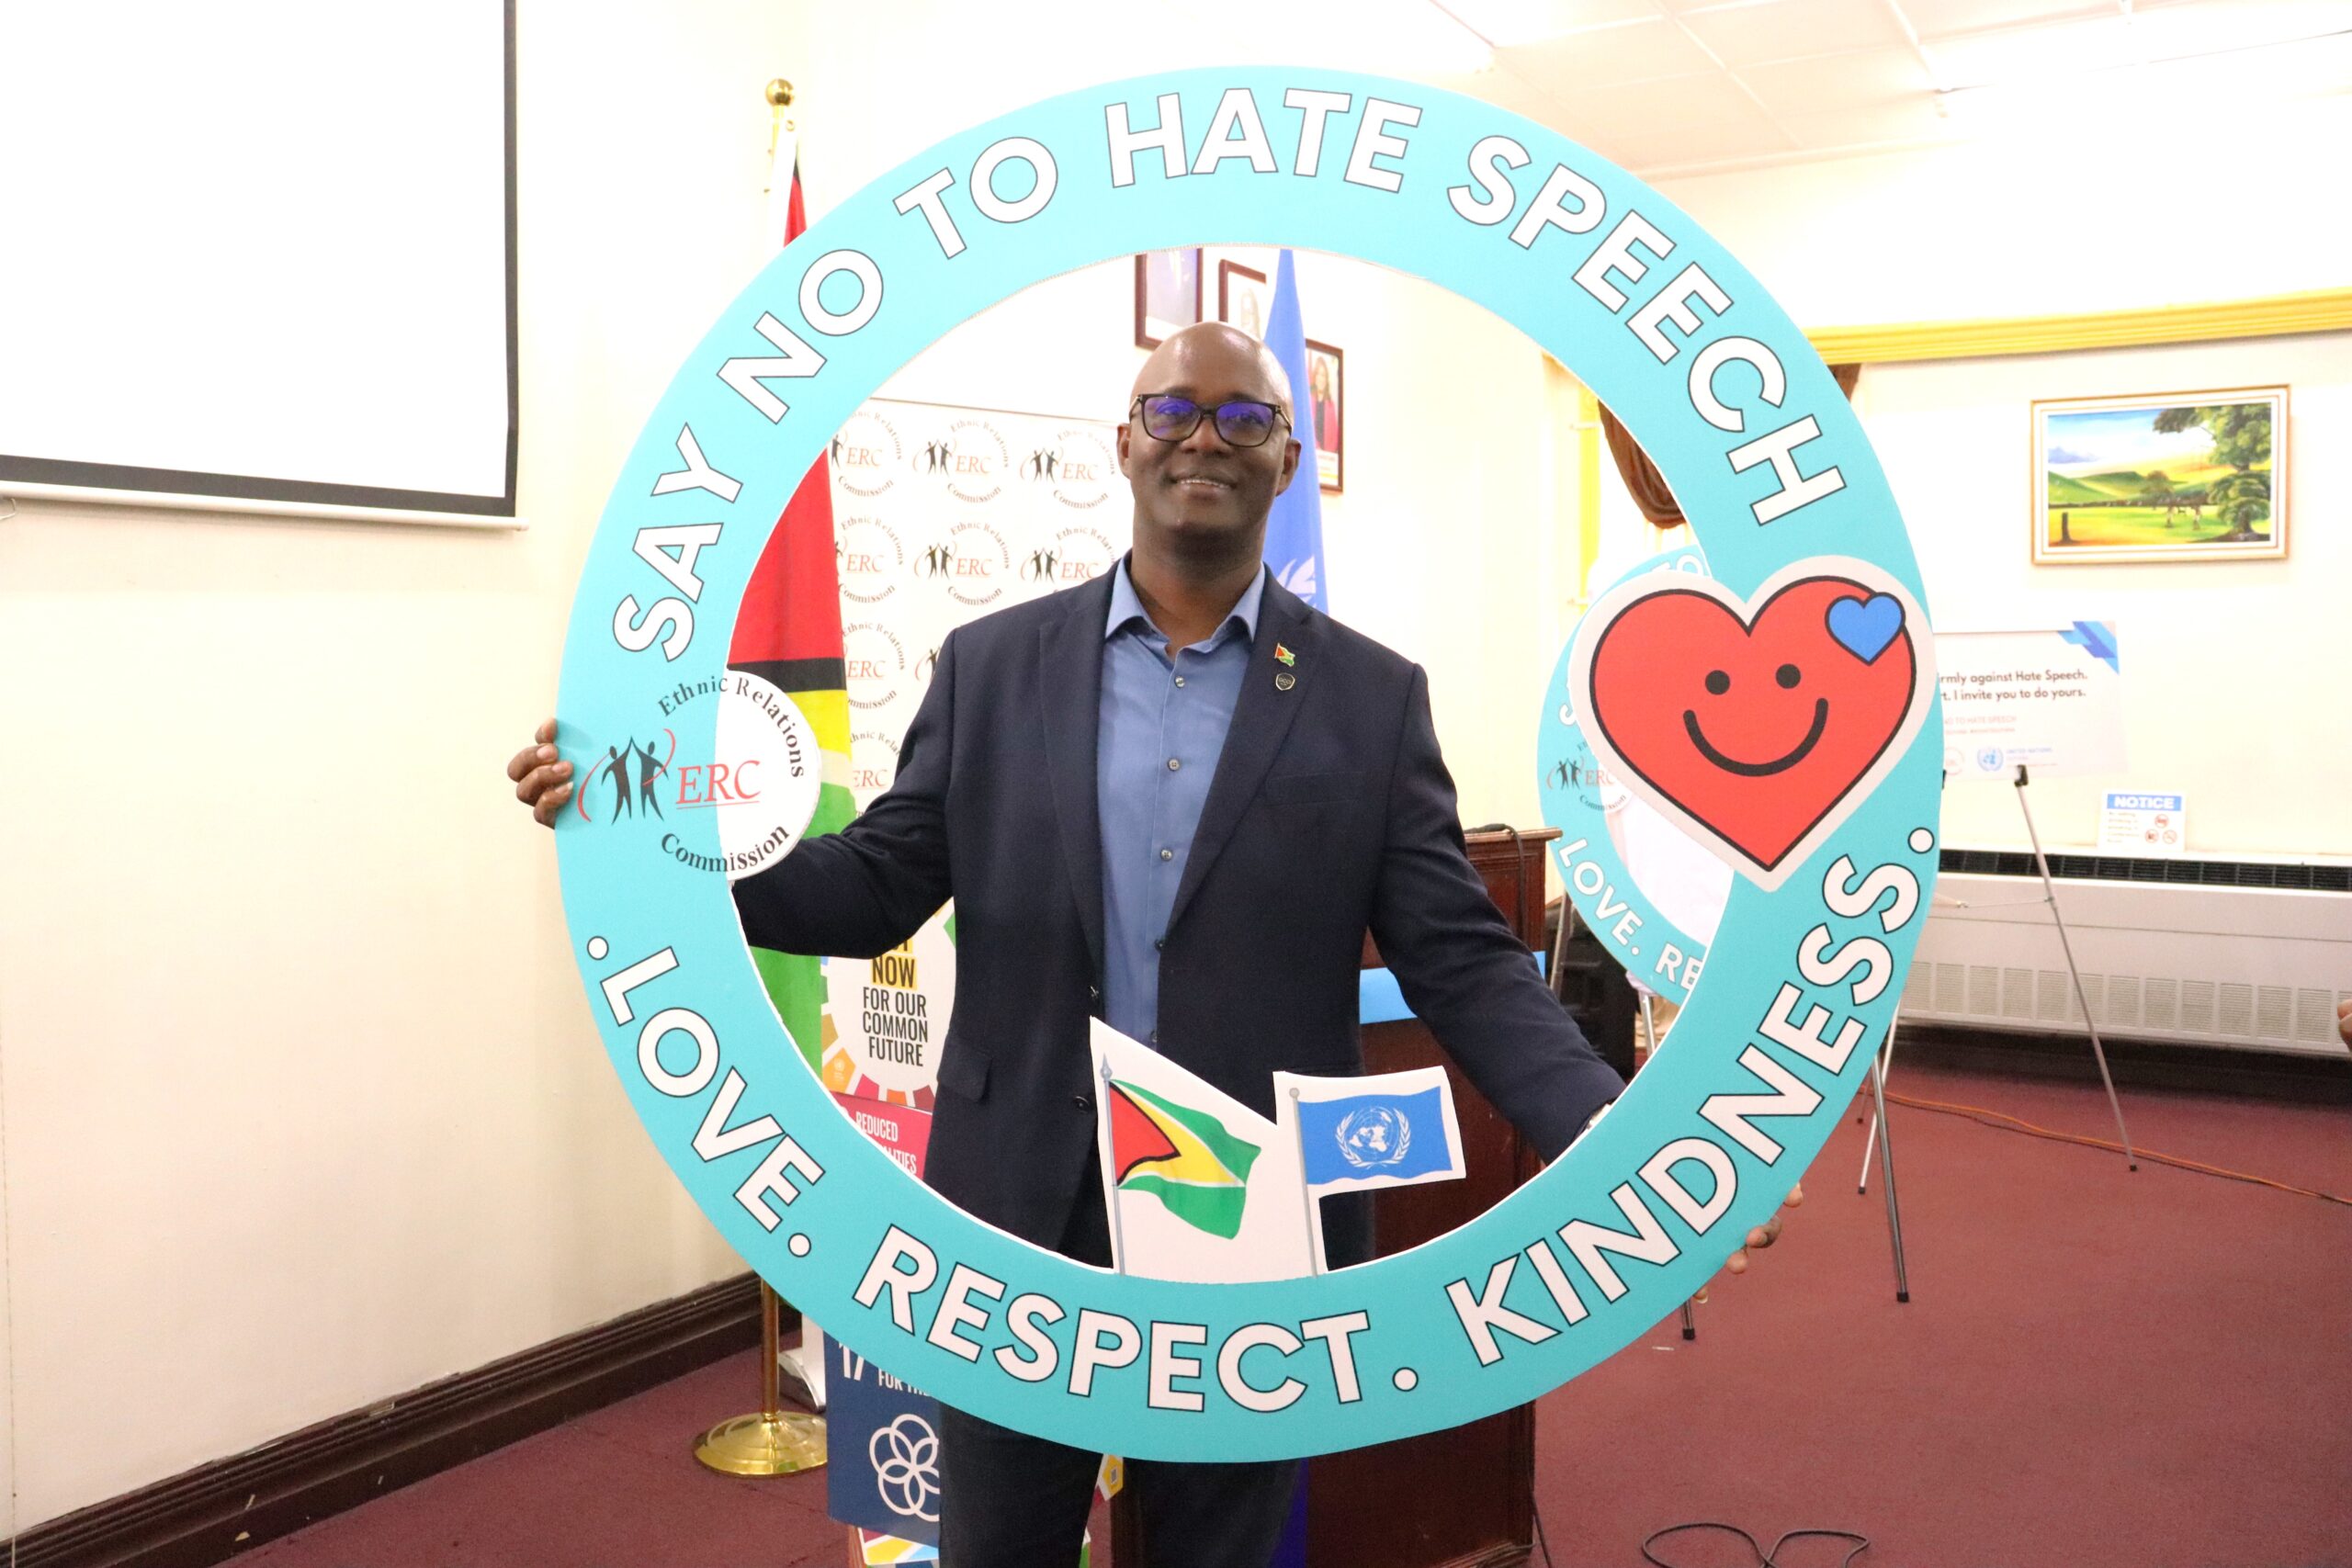 GCCI President lobbies private sector to combat hate speech